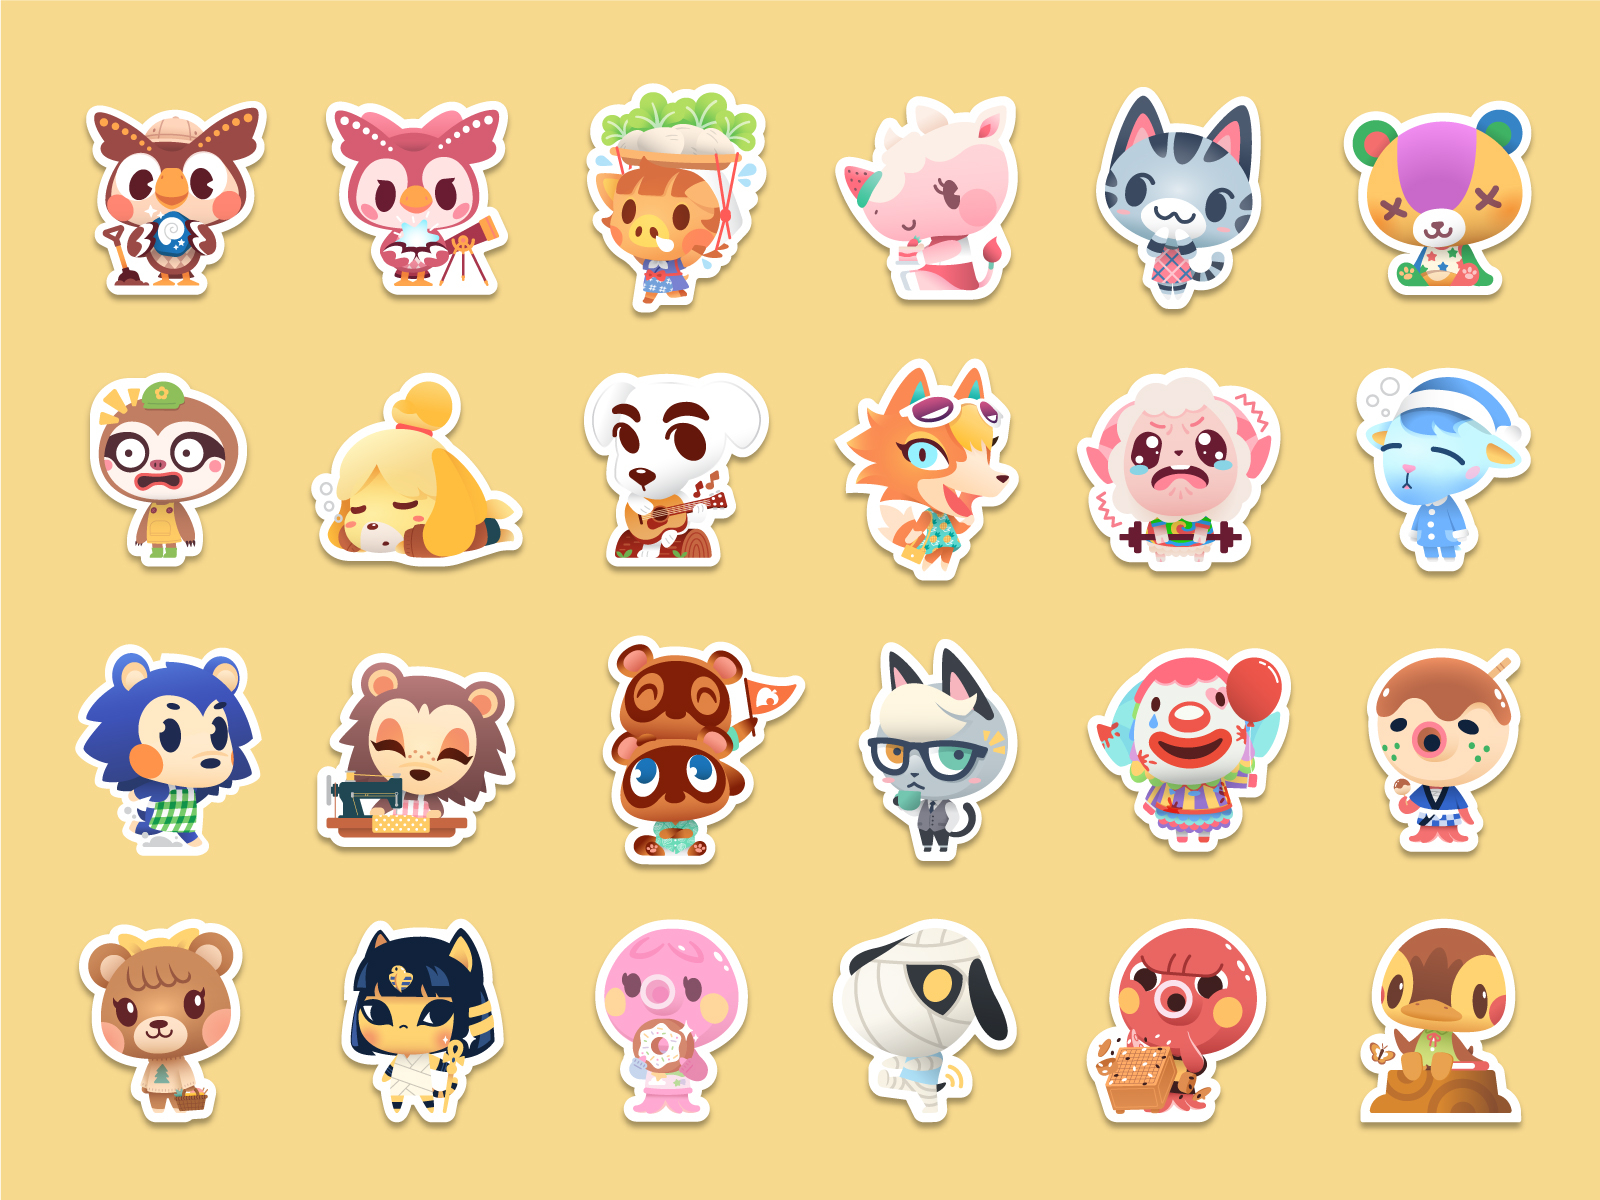 Animal Crossing Stickers by Ricky Linn on Dribbble